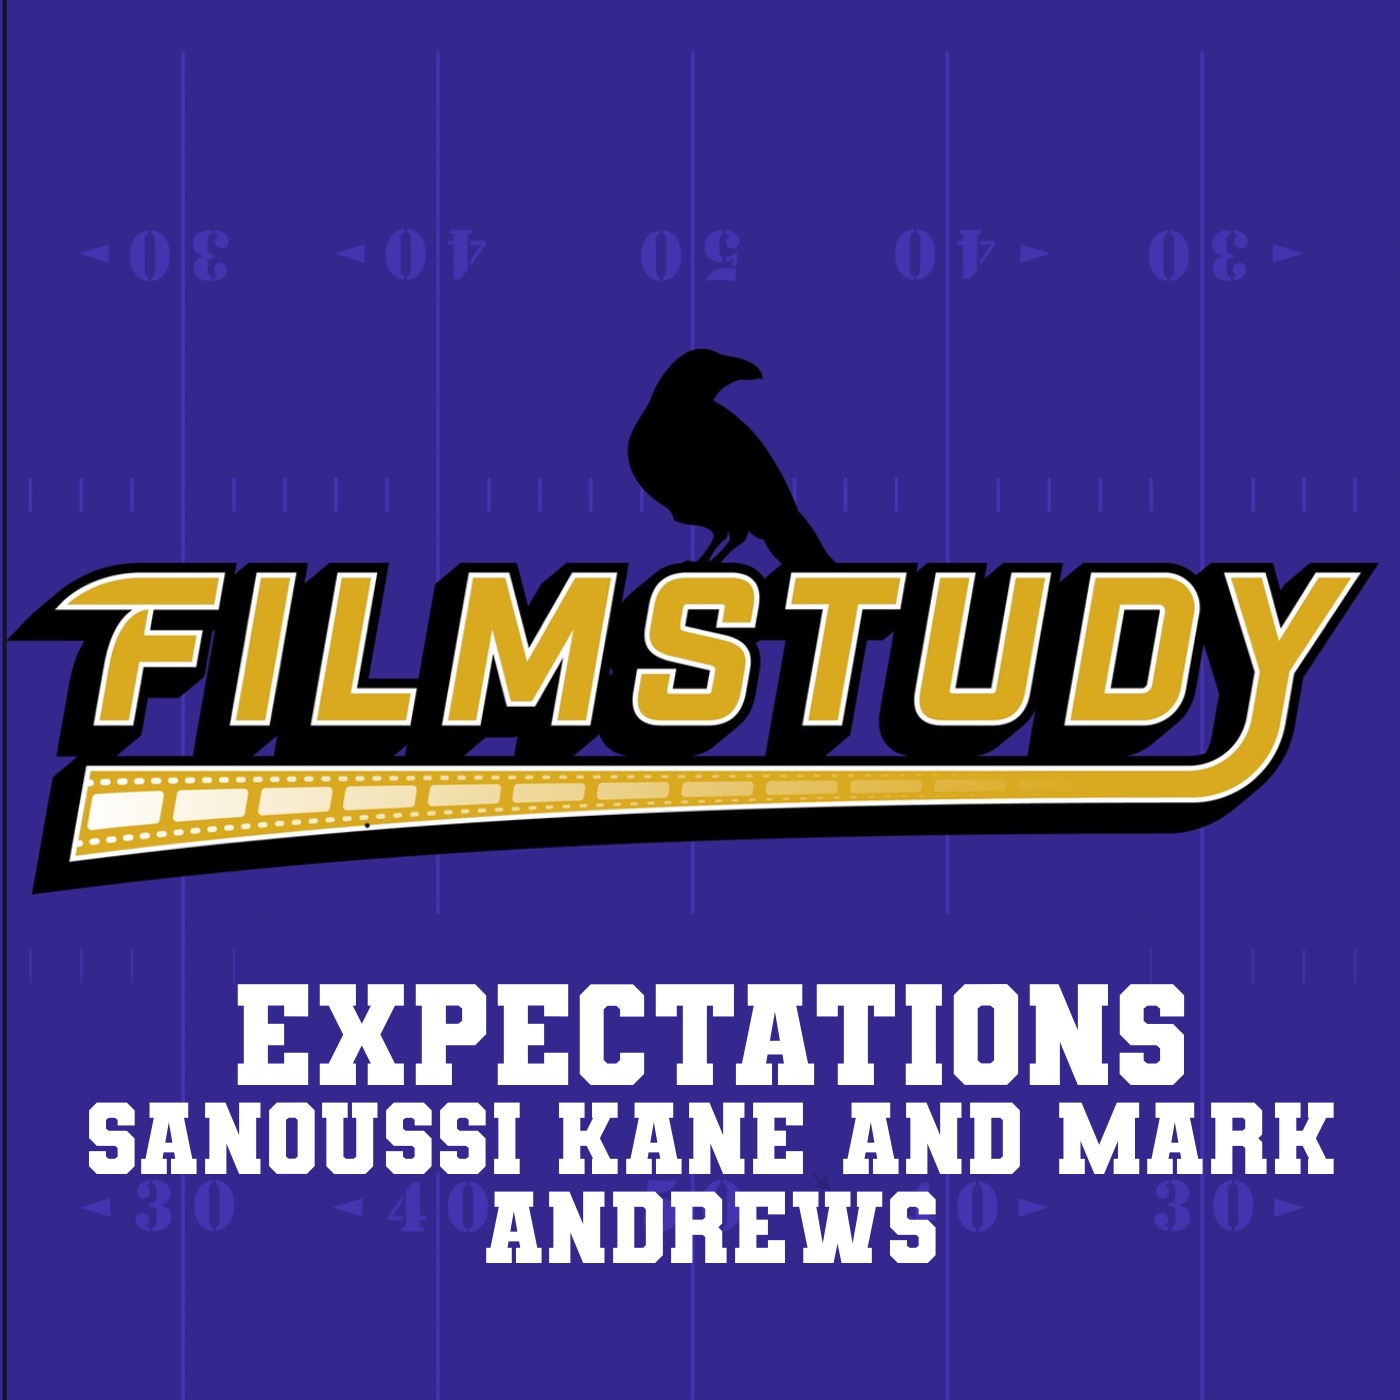 Expectations: Sanoussi Kane and Mark Andrews